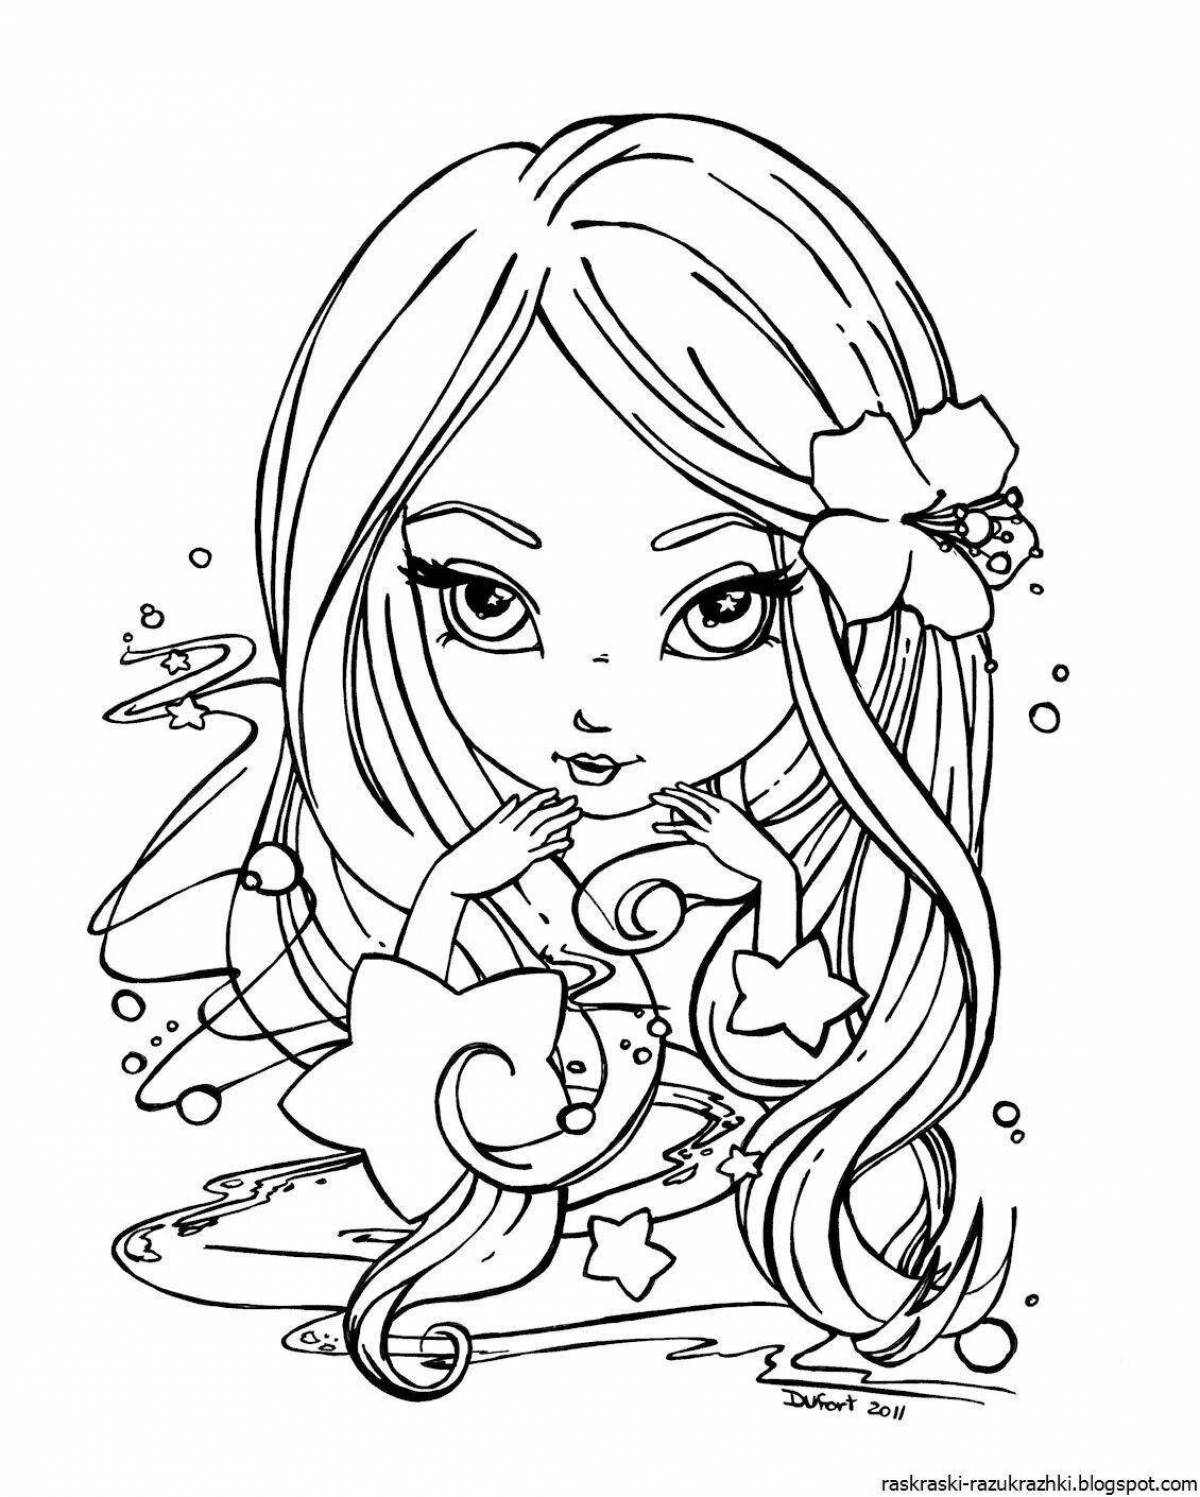 Color-magic coloring page for girls 14-15 years old